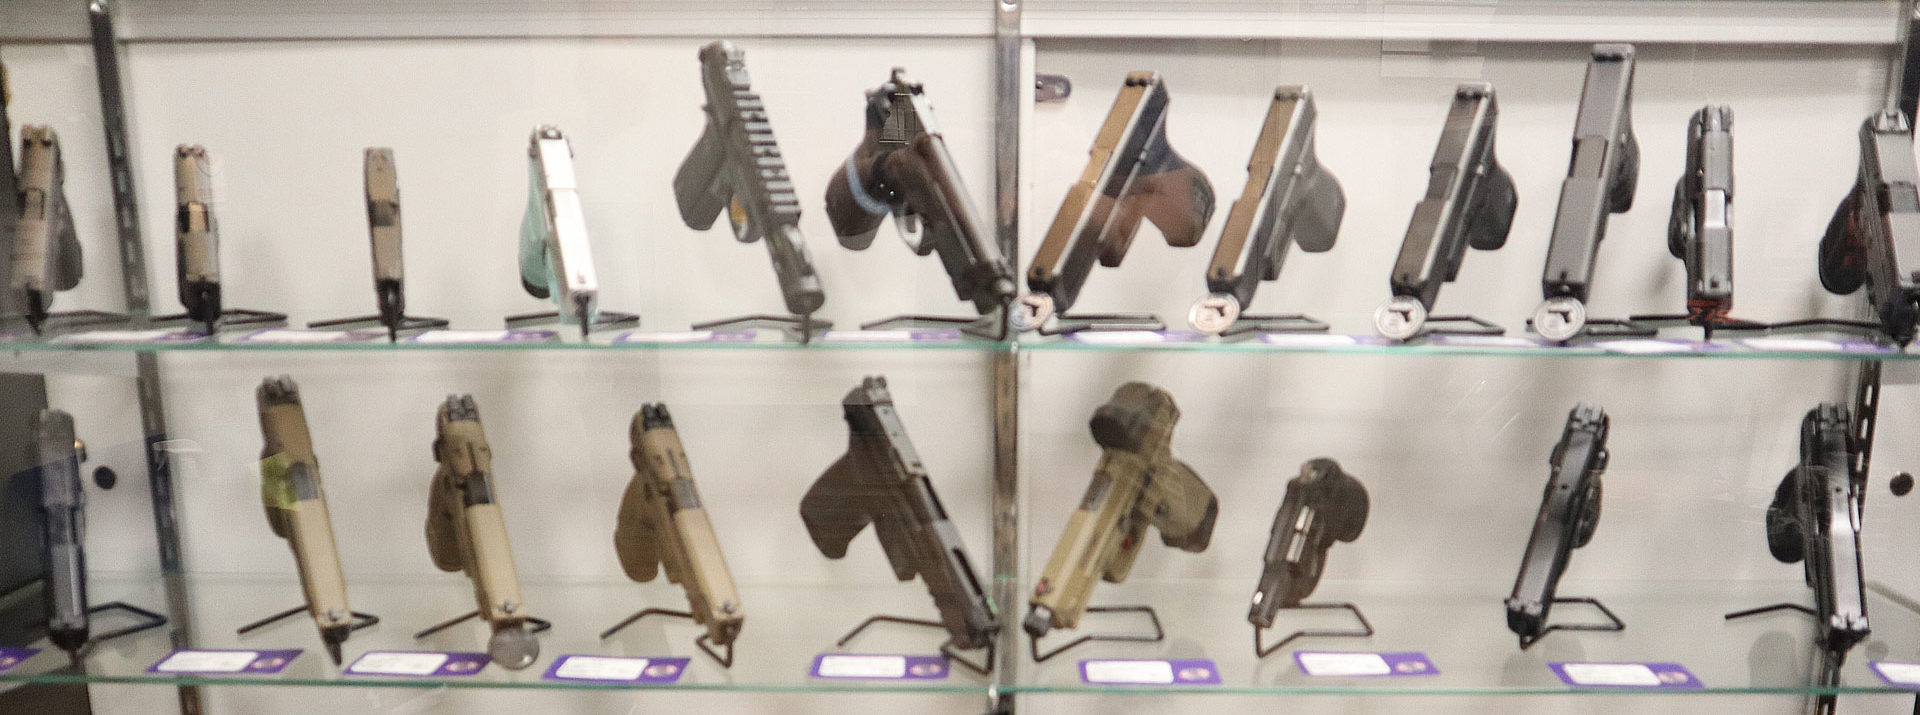 Huge Selection of
Firearms & Accessories